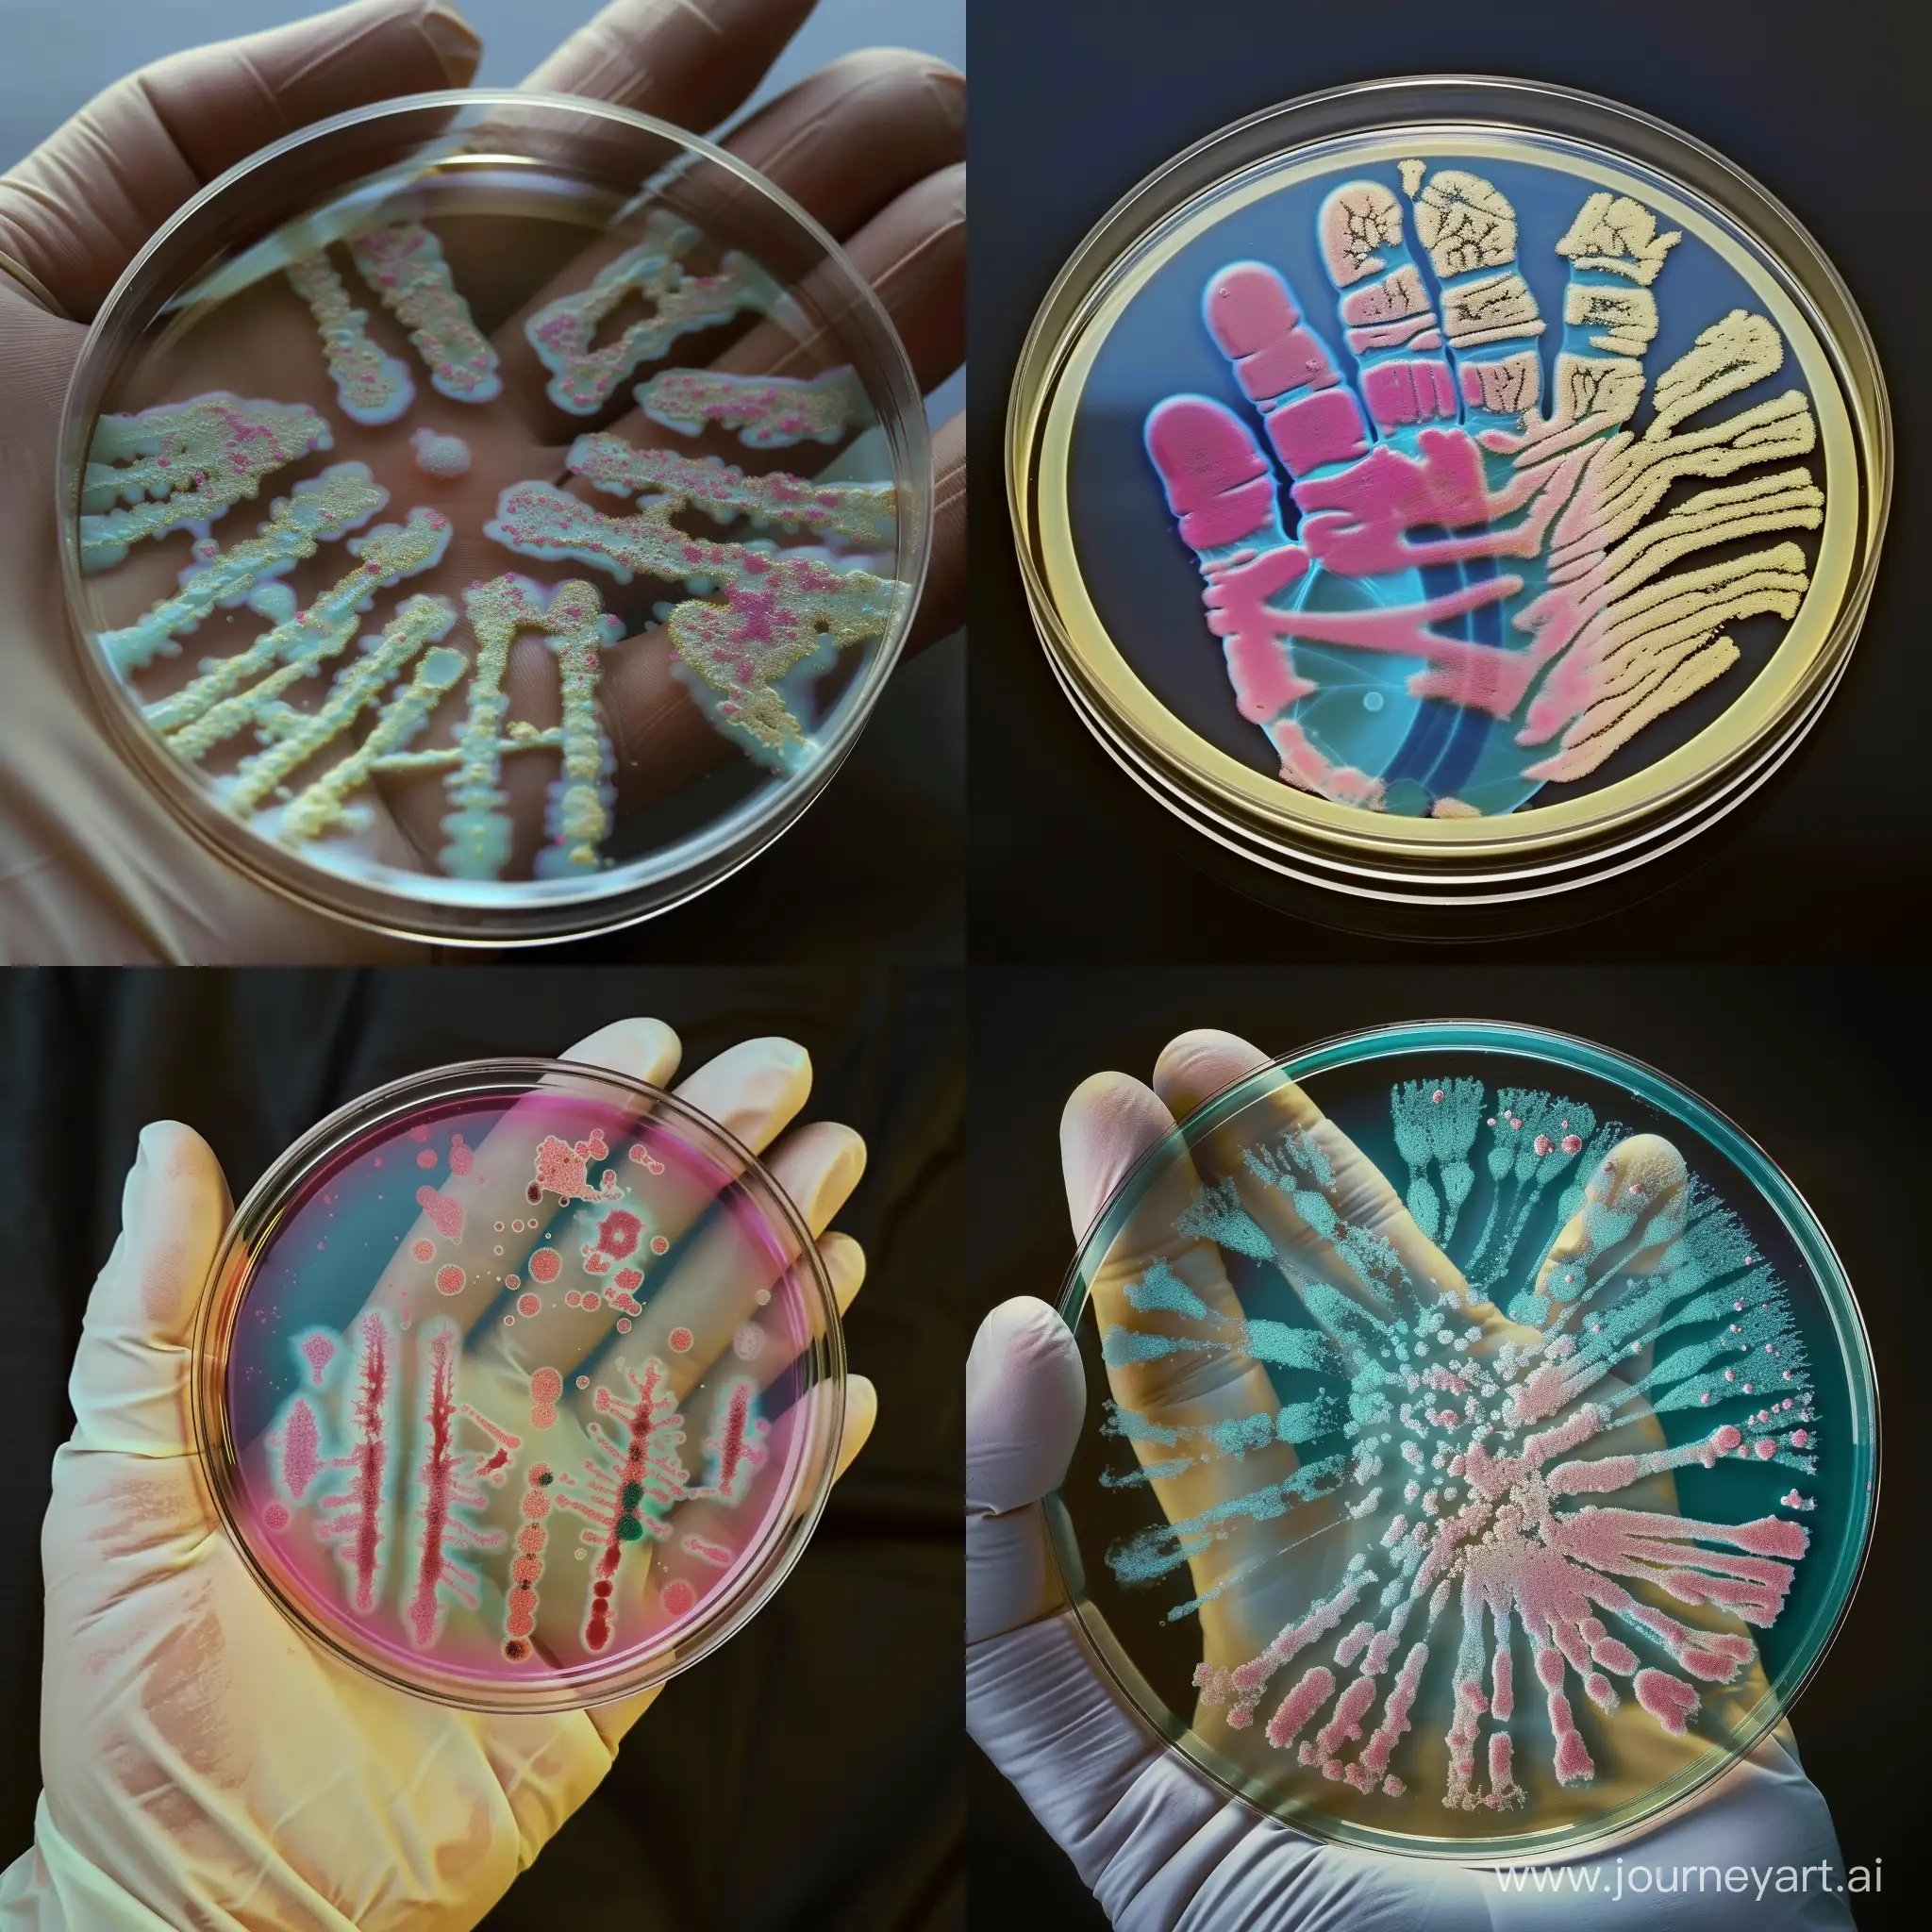 Bacterial-Growth-Patterns-on-Handprint-Petri-Dish-After-2-Days-of-Incubation